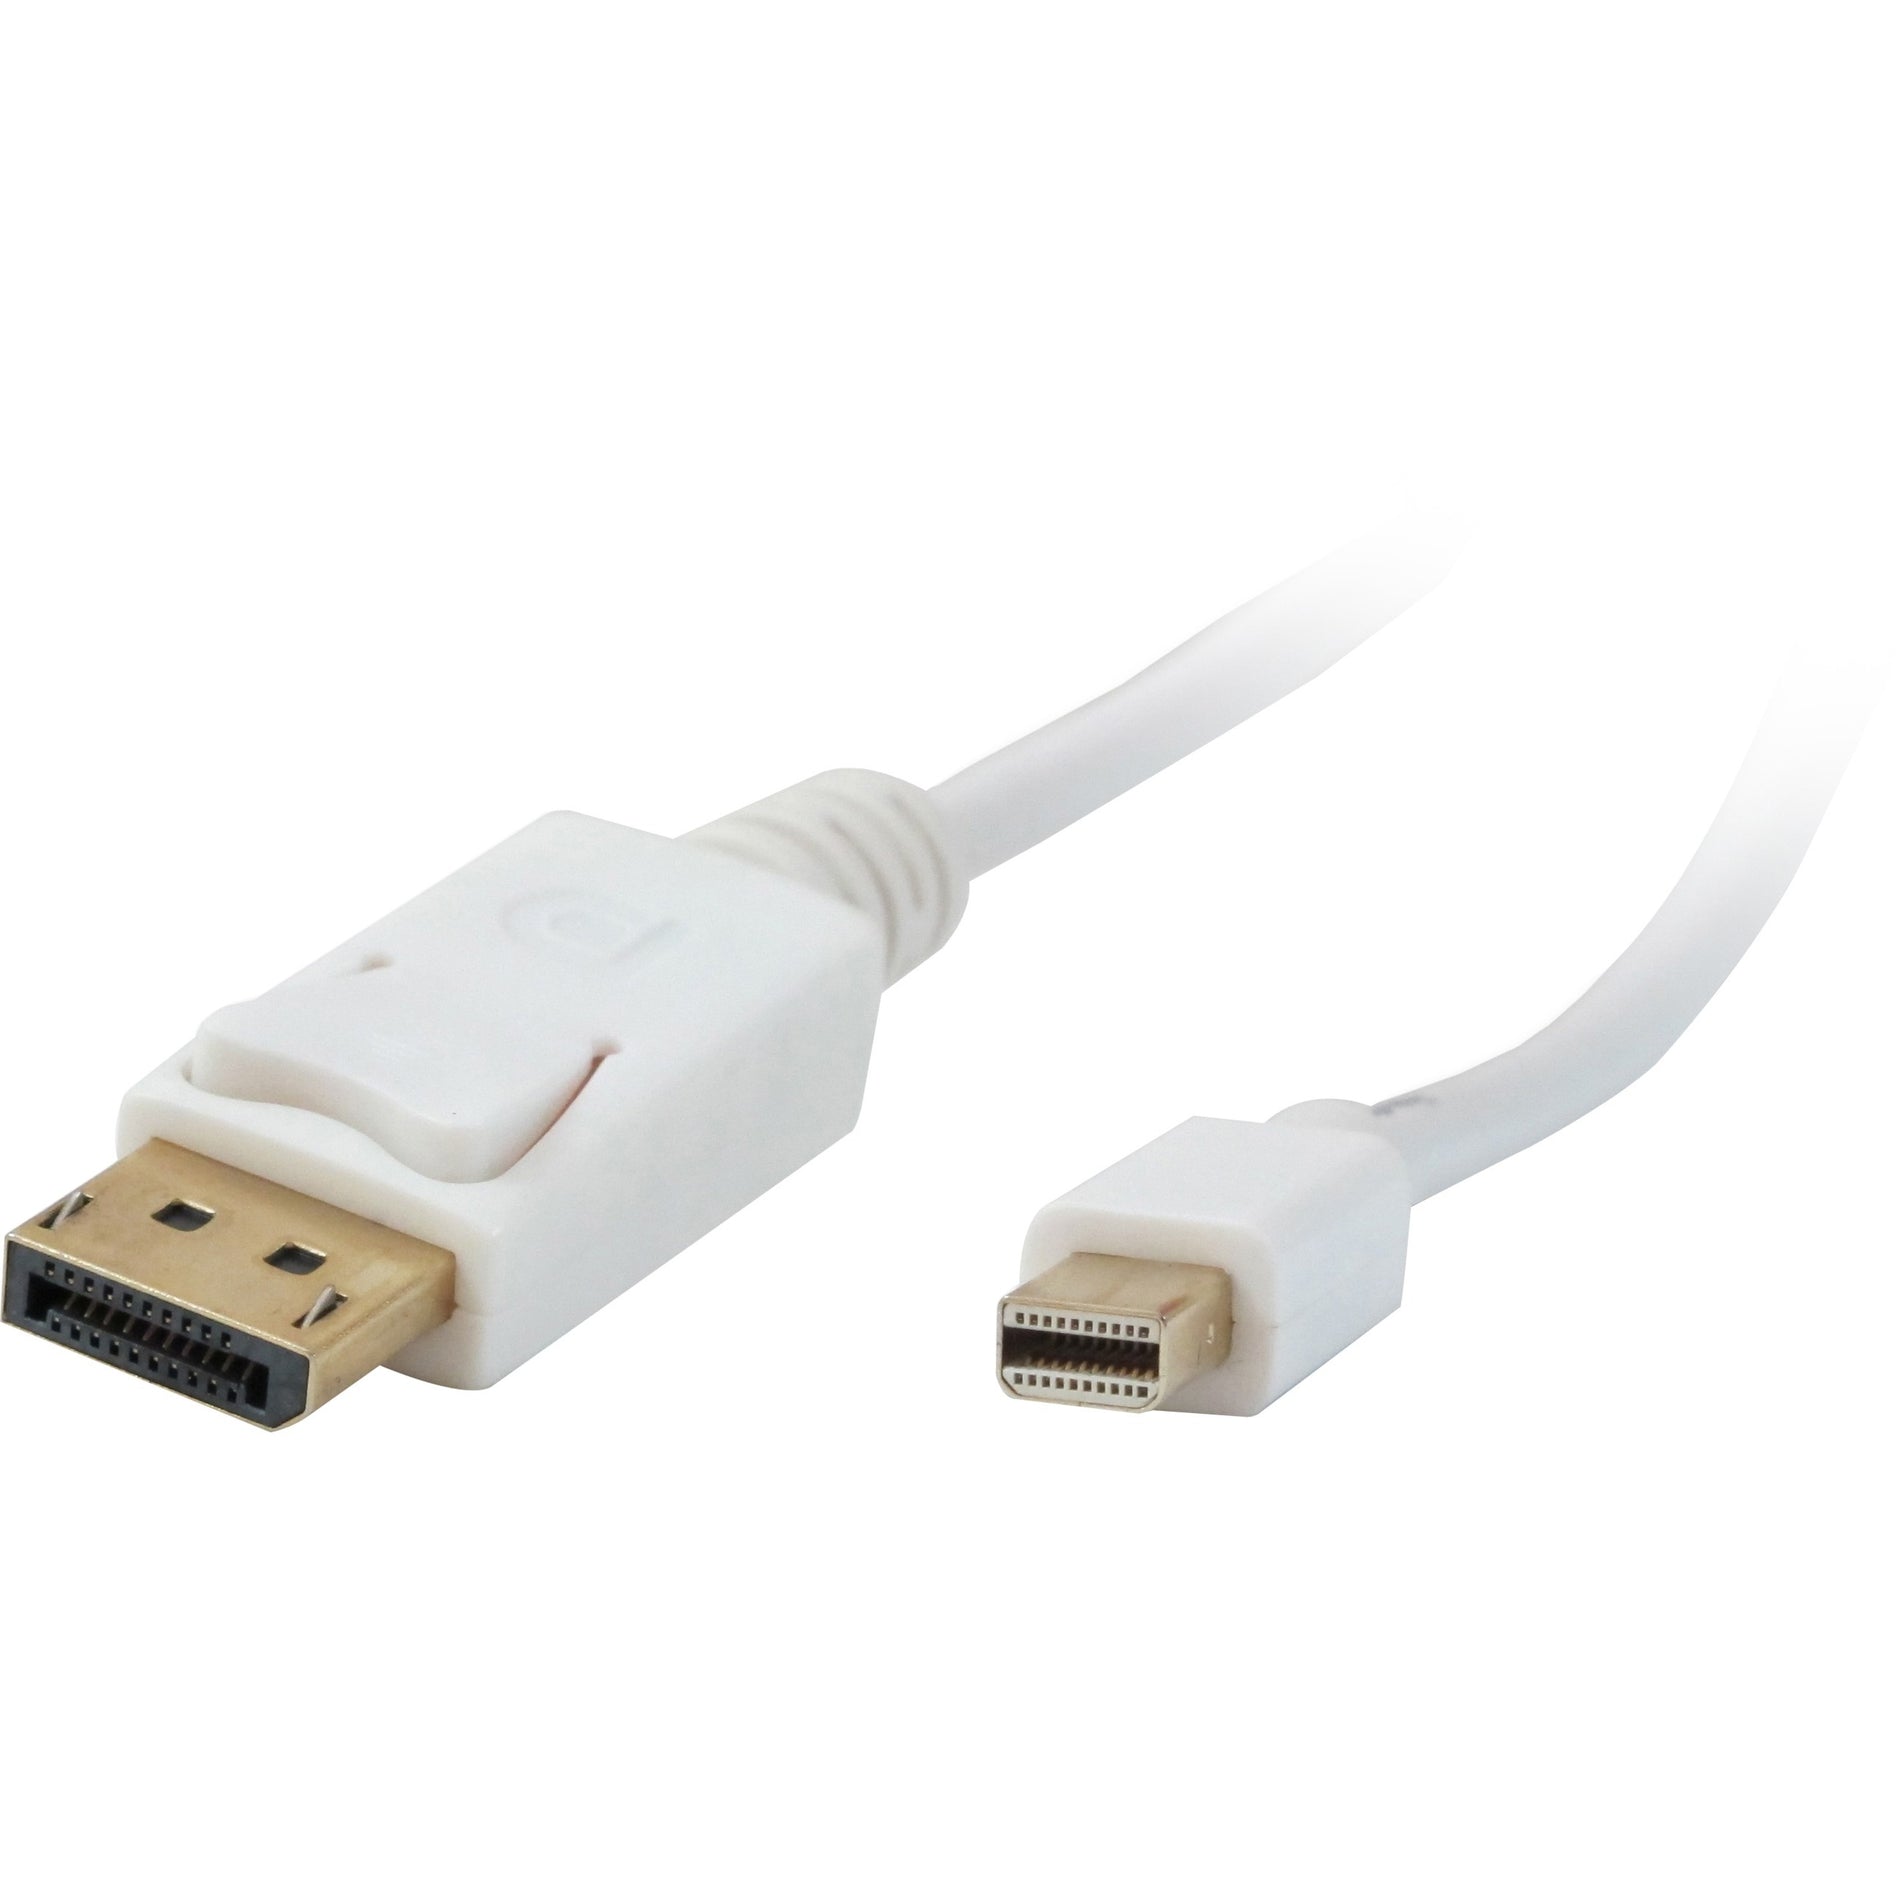 Comprehensive MDP-DISP-6ST Mini DisplayPort Male to DisplayPort Male Cable 6ft, High-Speed Data Transfer, Lifetime Warranty